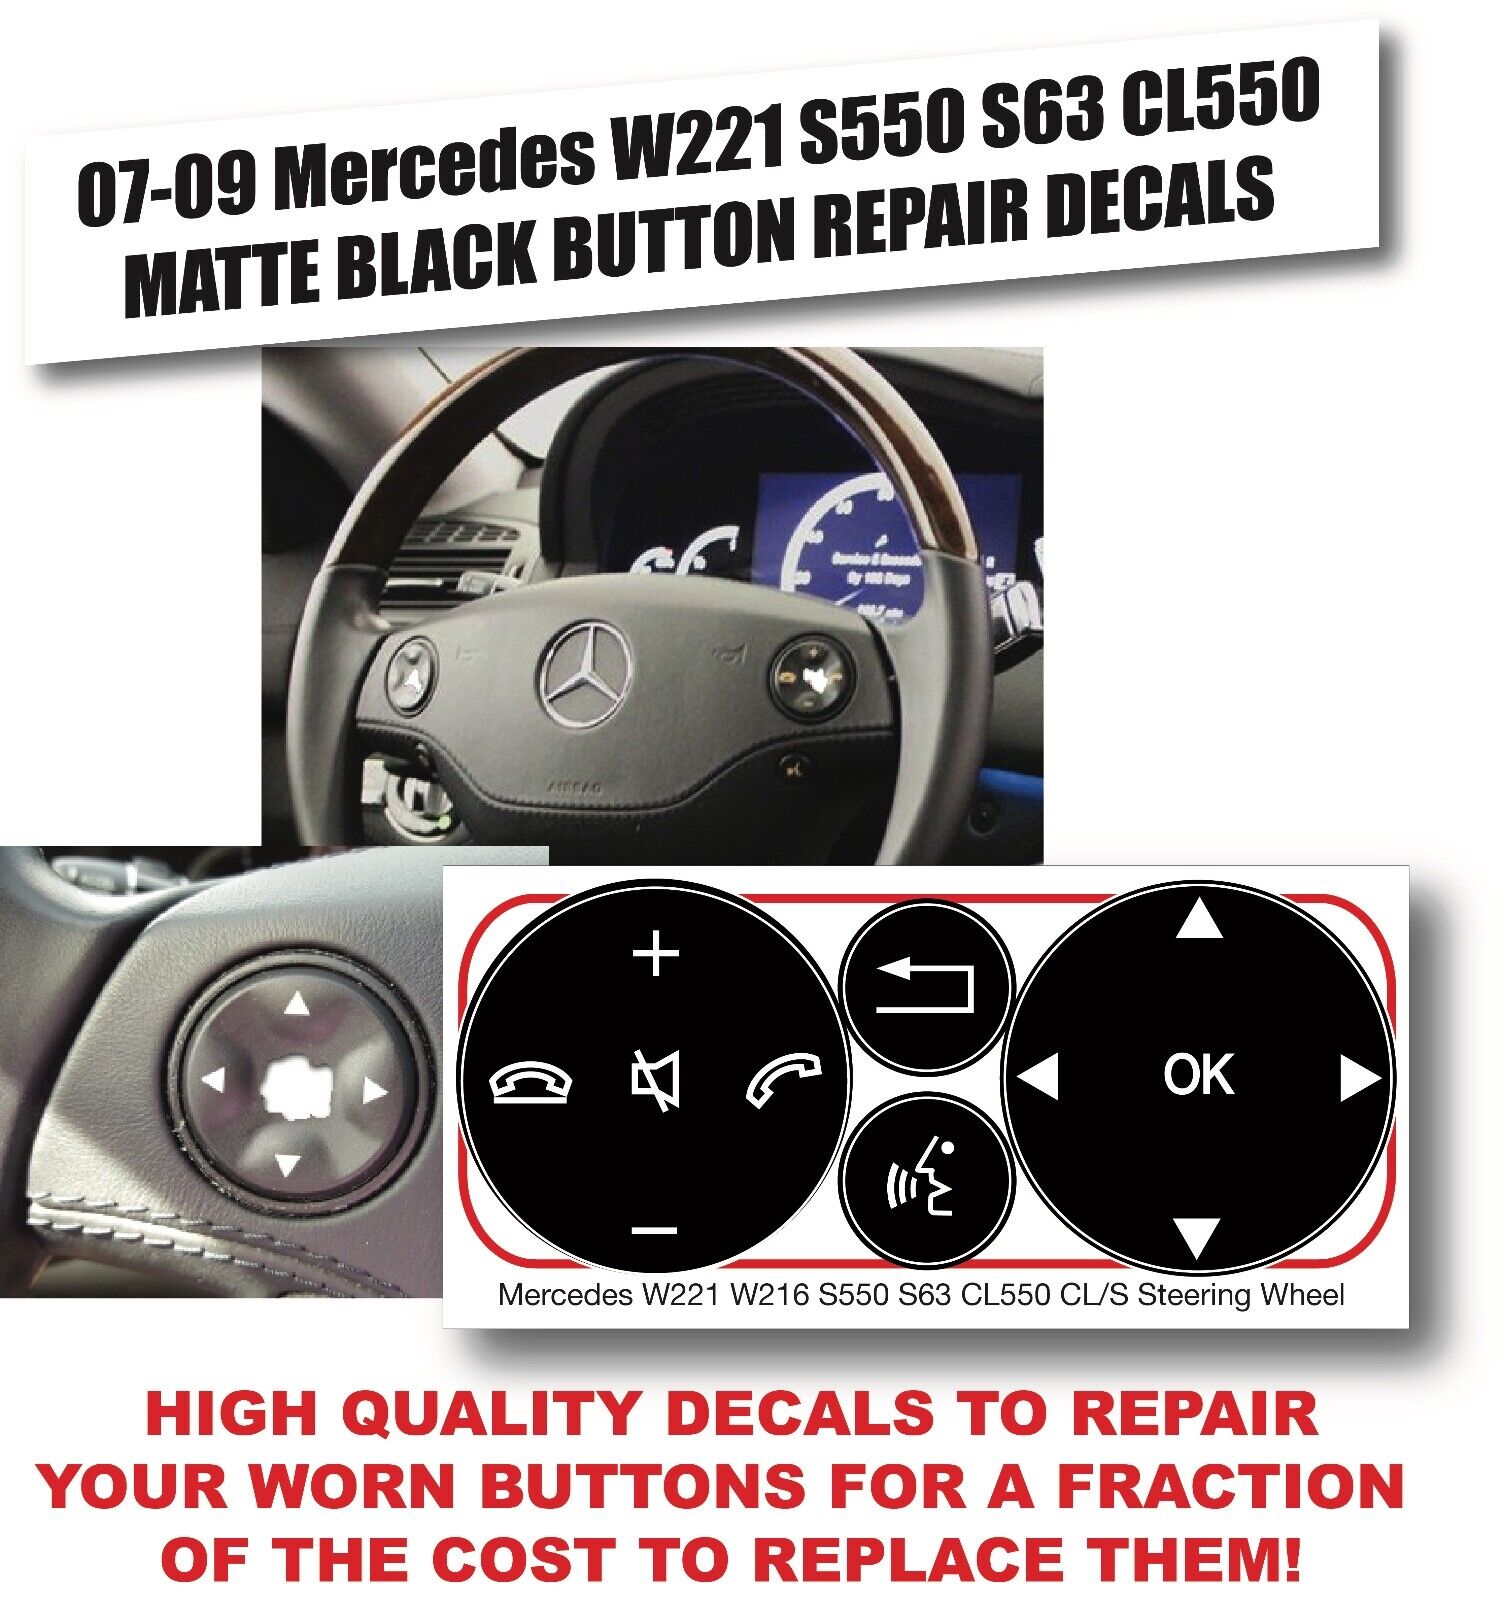 07-09 Mercedes W221 S550 S63 CL550 Steering Wheel Control Button Repair Decals